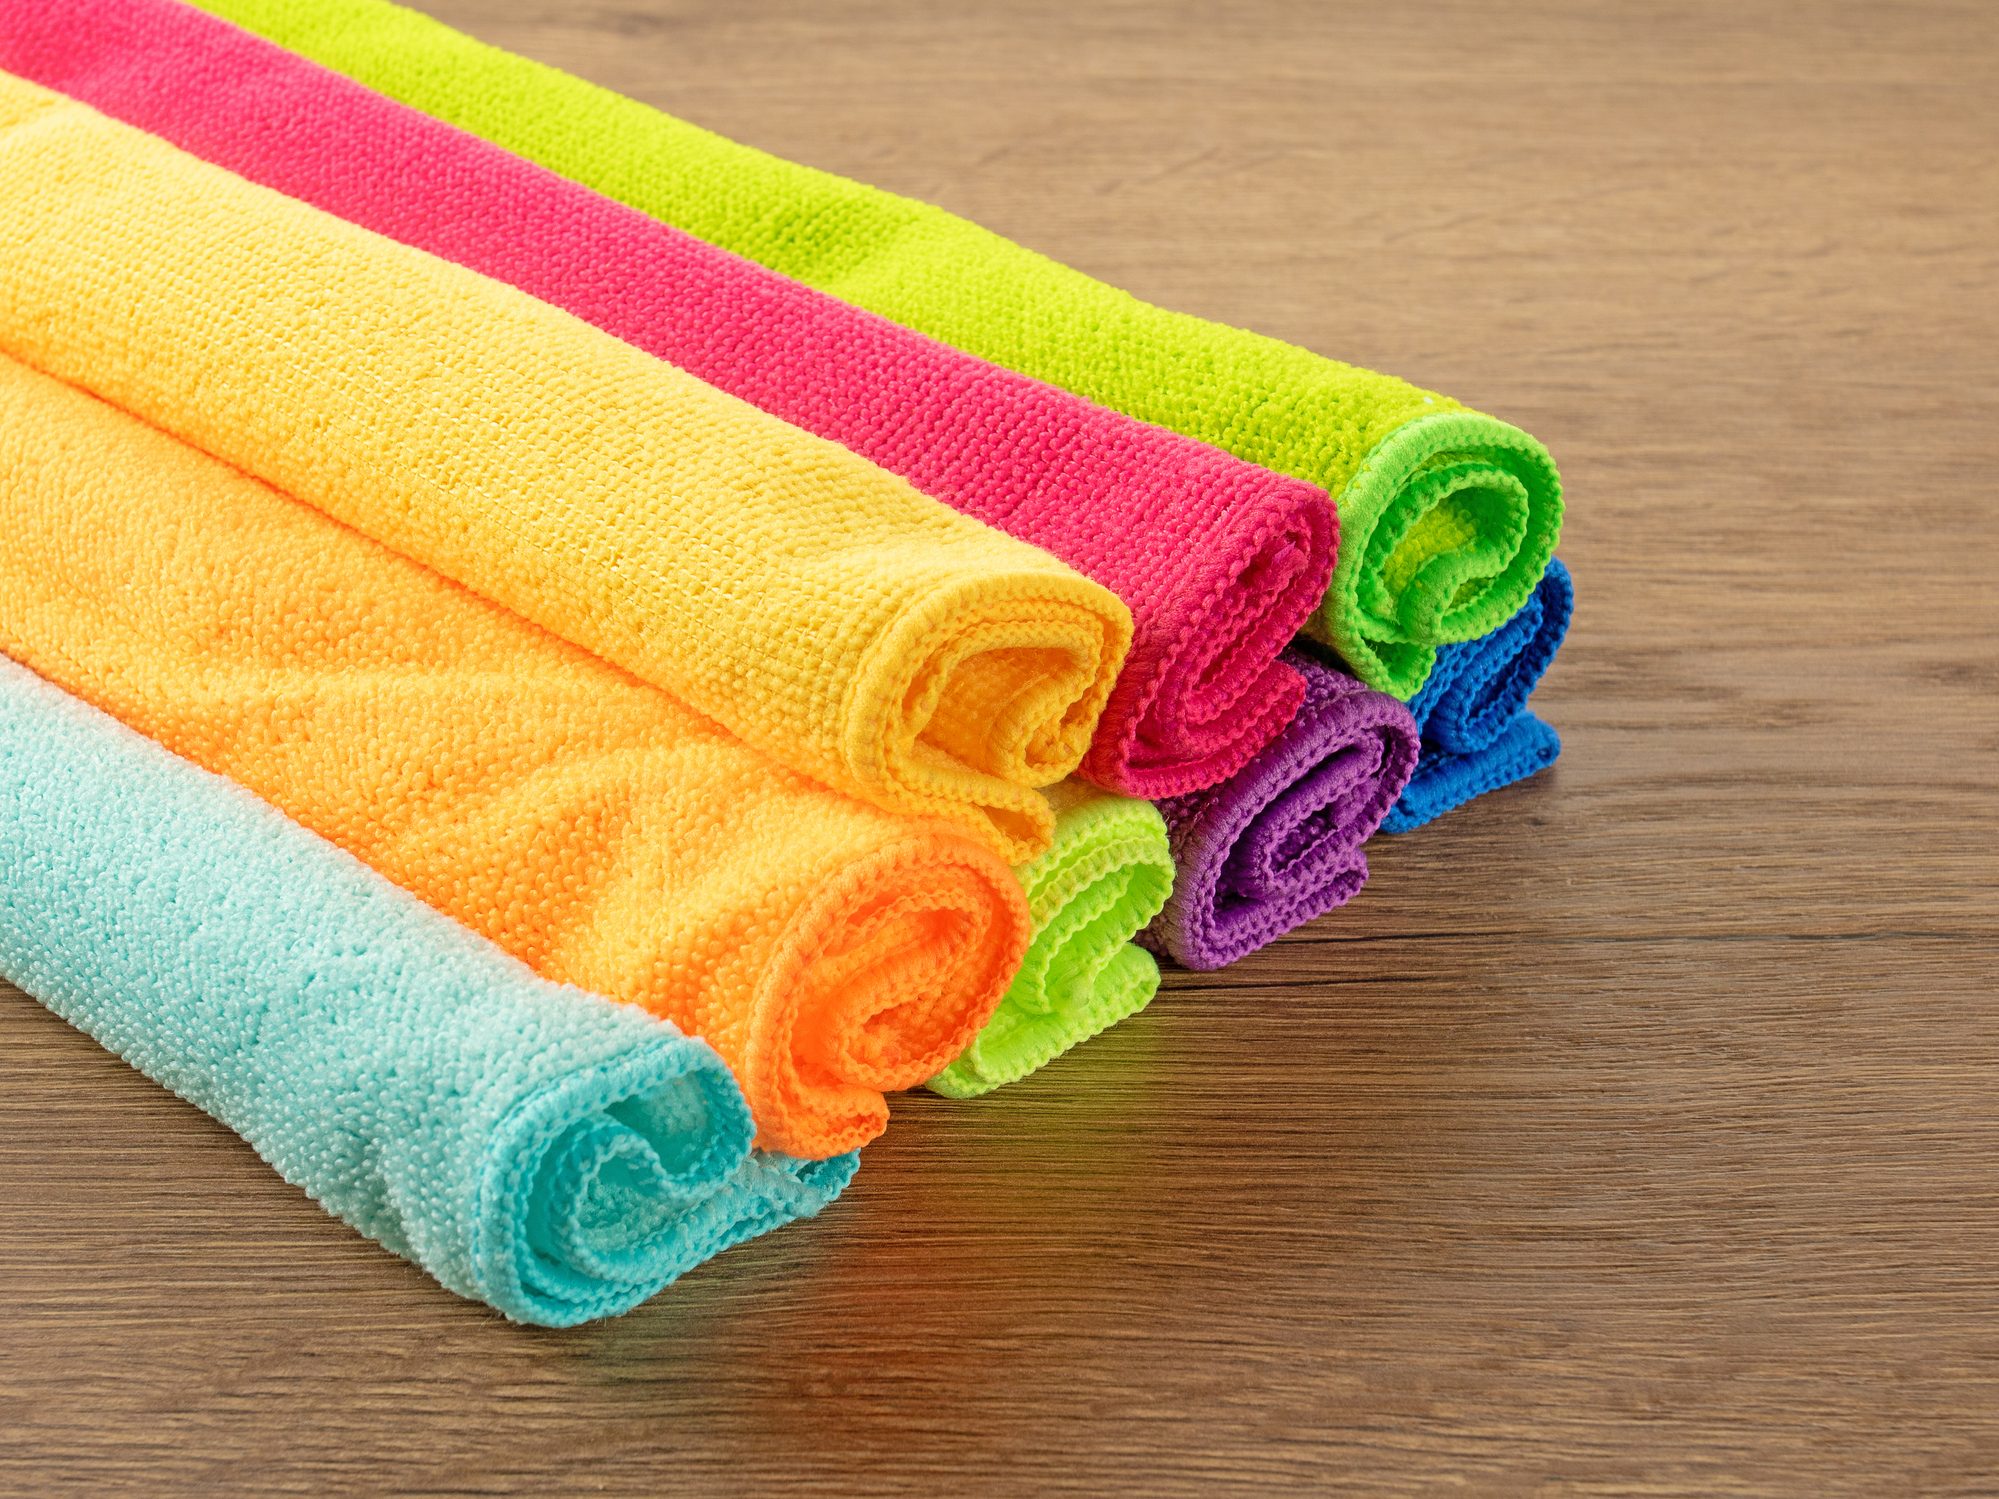 How to Wash Microfiber Towels Correctly